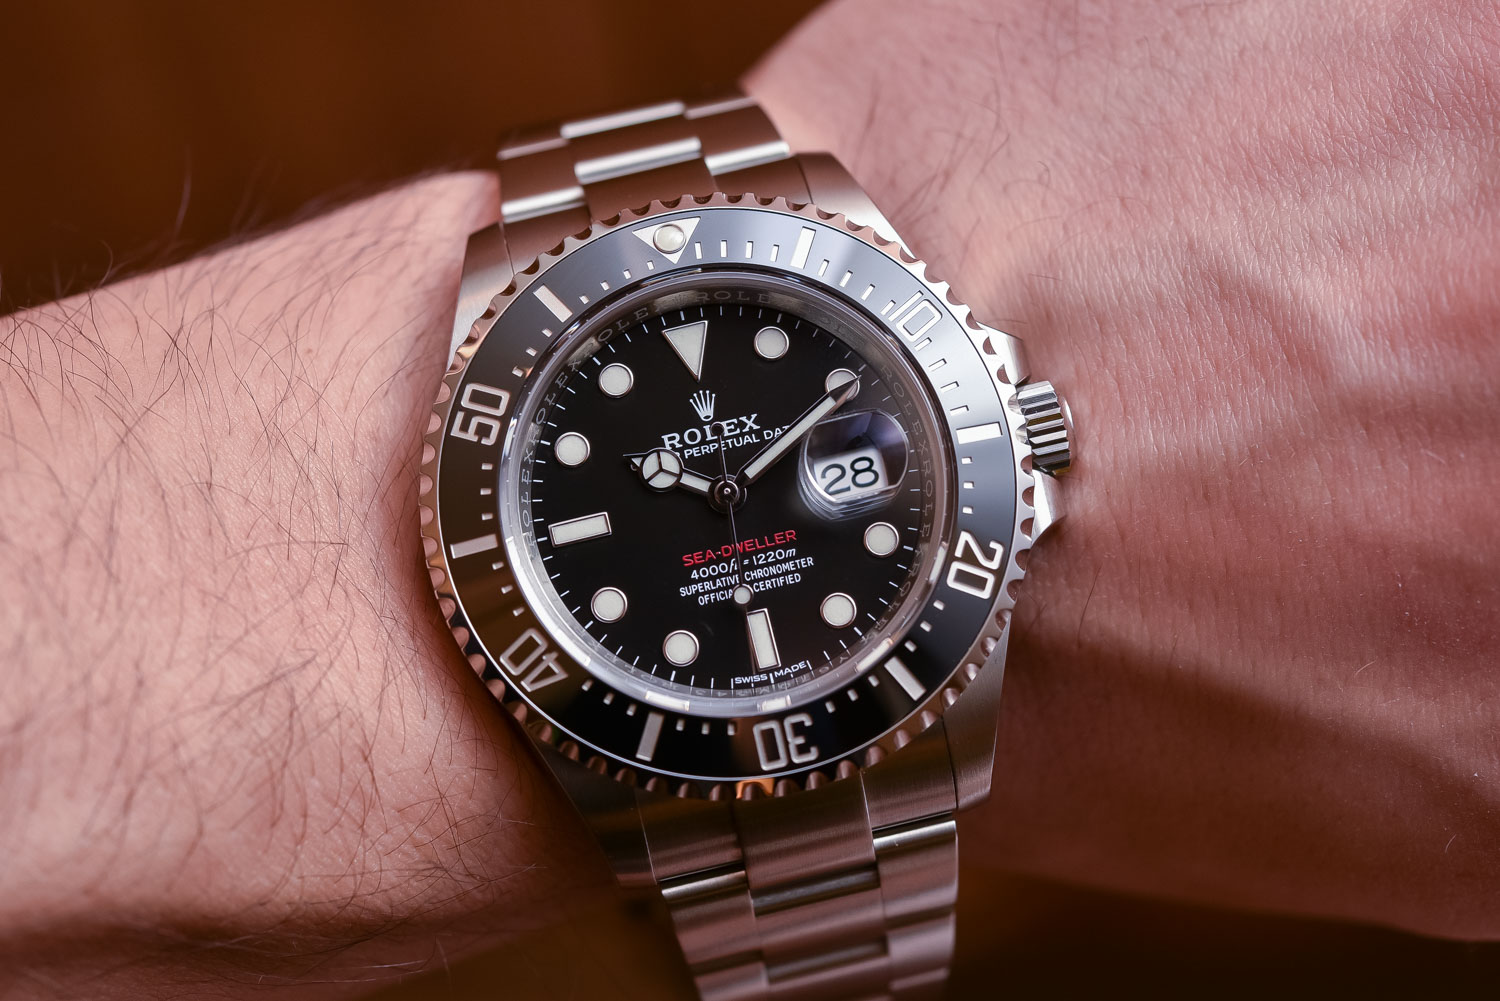 Rolex sea-dweller 126600 43mm red text - Top 10 Baselworld 2017